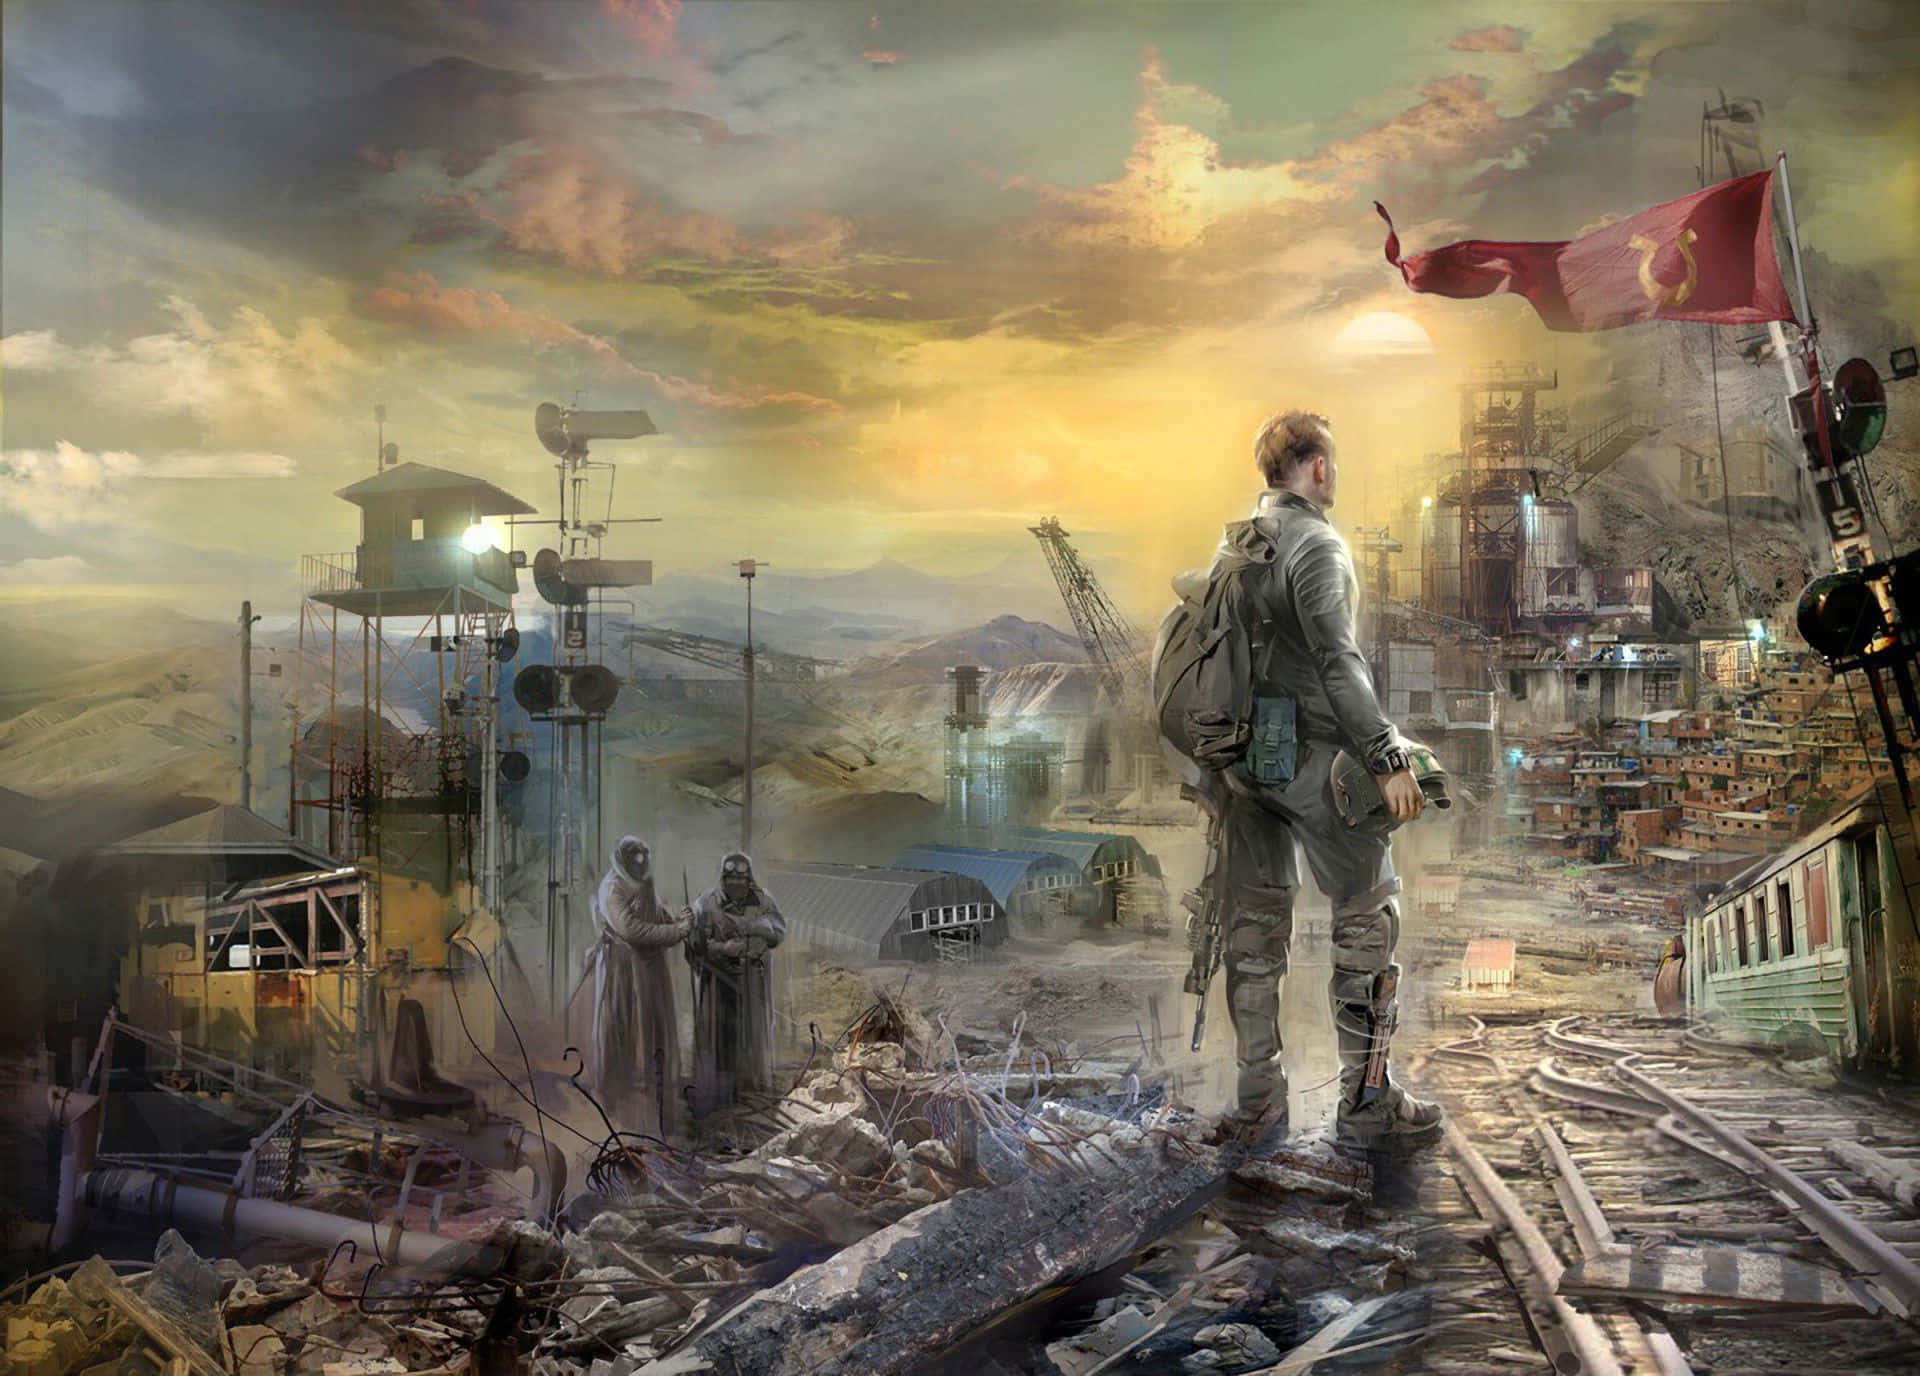 Welcome to the Post Apocalyptic World Wallpaper